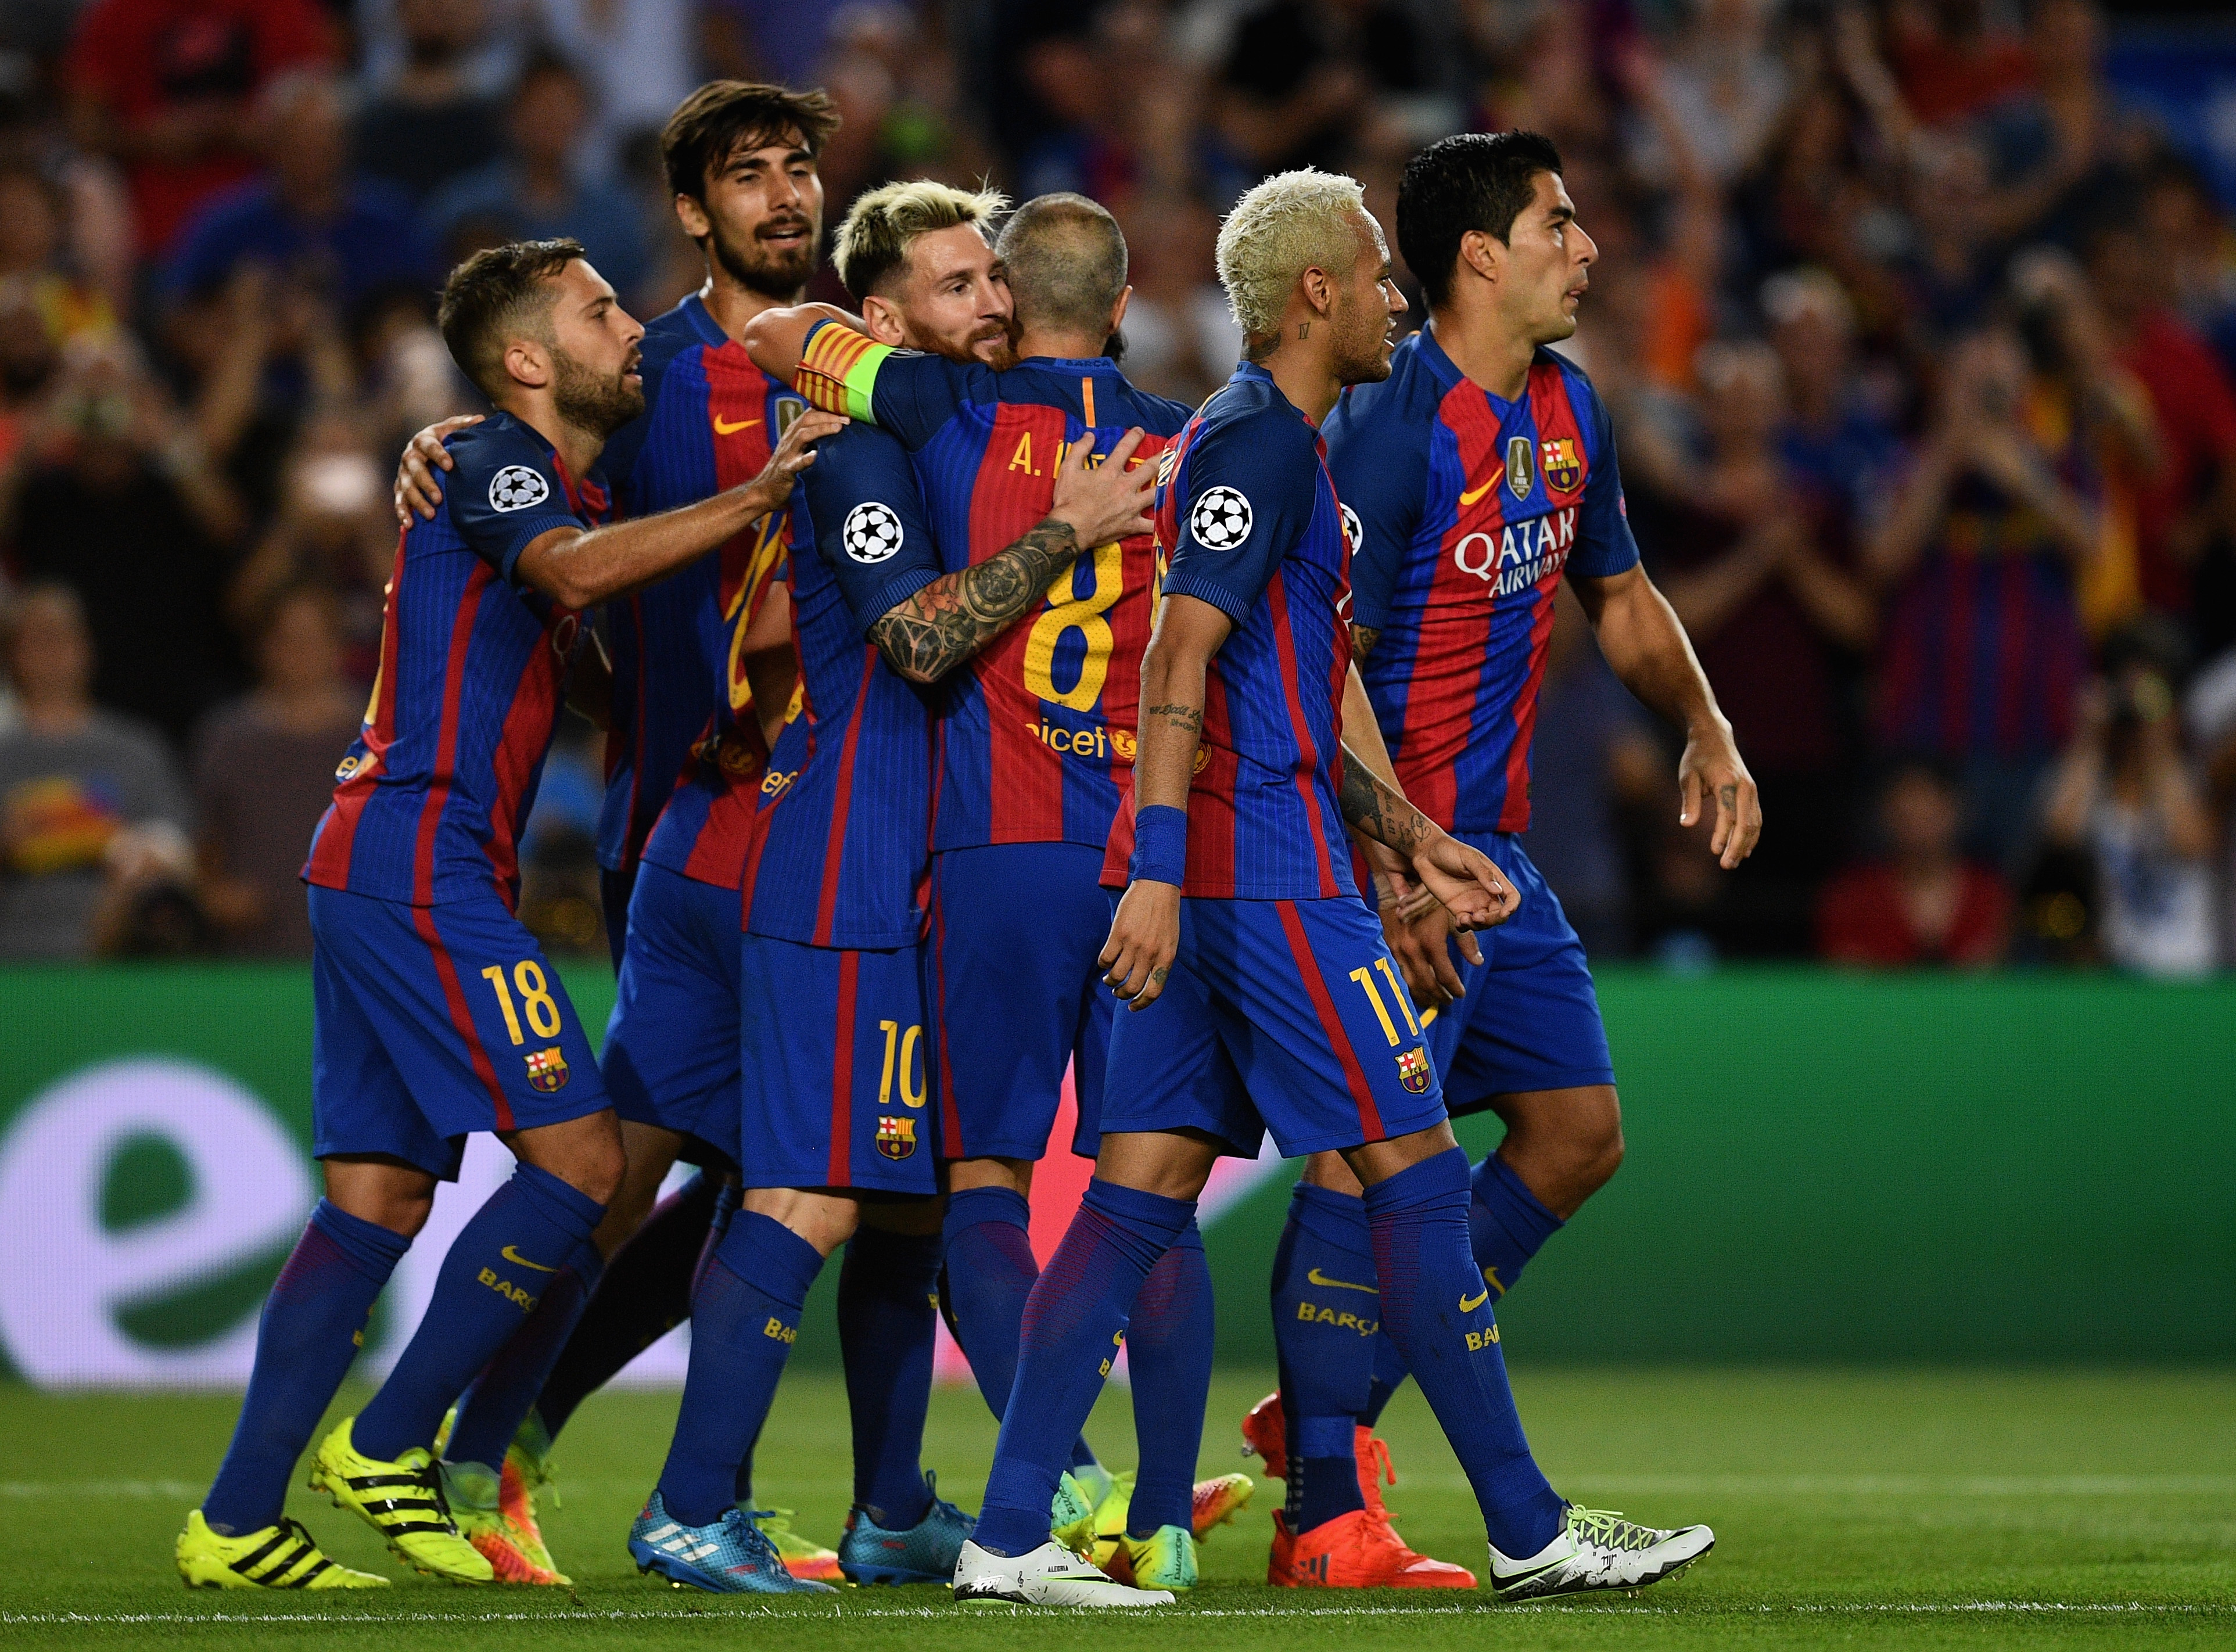 BARCELONA, SPAIN - SEPTEMBER 13:  Lionel Messi of Barcelona celebreates scoring his third and his sides fifth goal with team mates during the UEFA Champions League Group C match between FC Barcelona and Celtic FC at Camp Nou on September 13, 2016 in Barcelona, Spain.  (Photo by David Ramos/Getty Images)